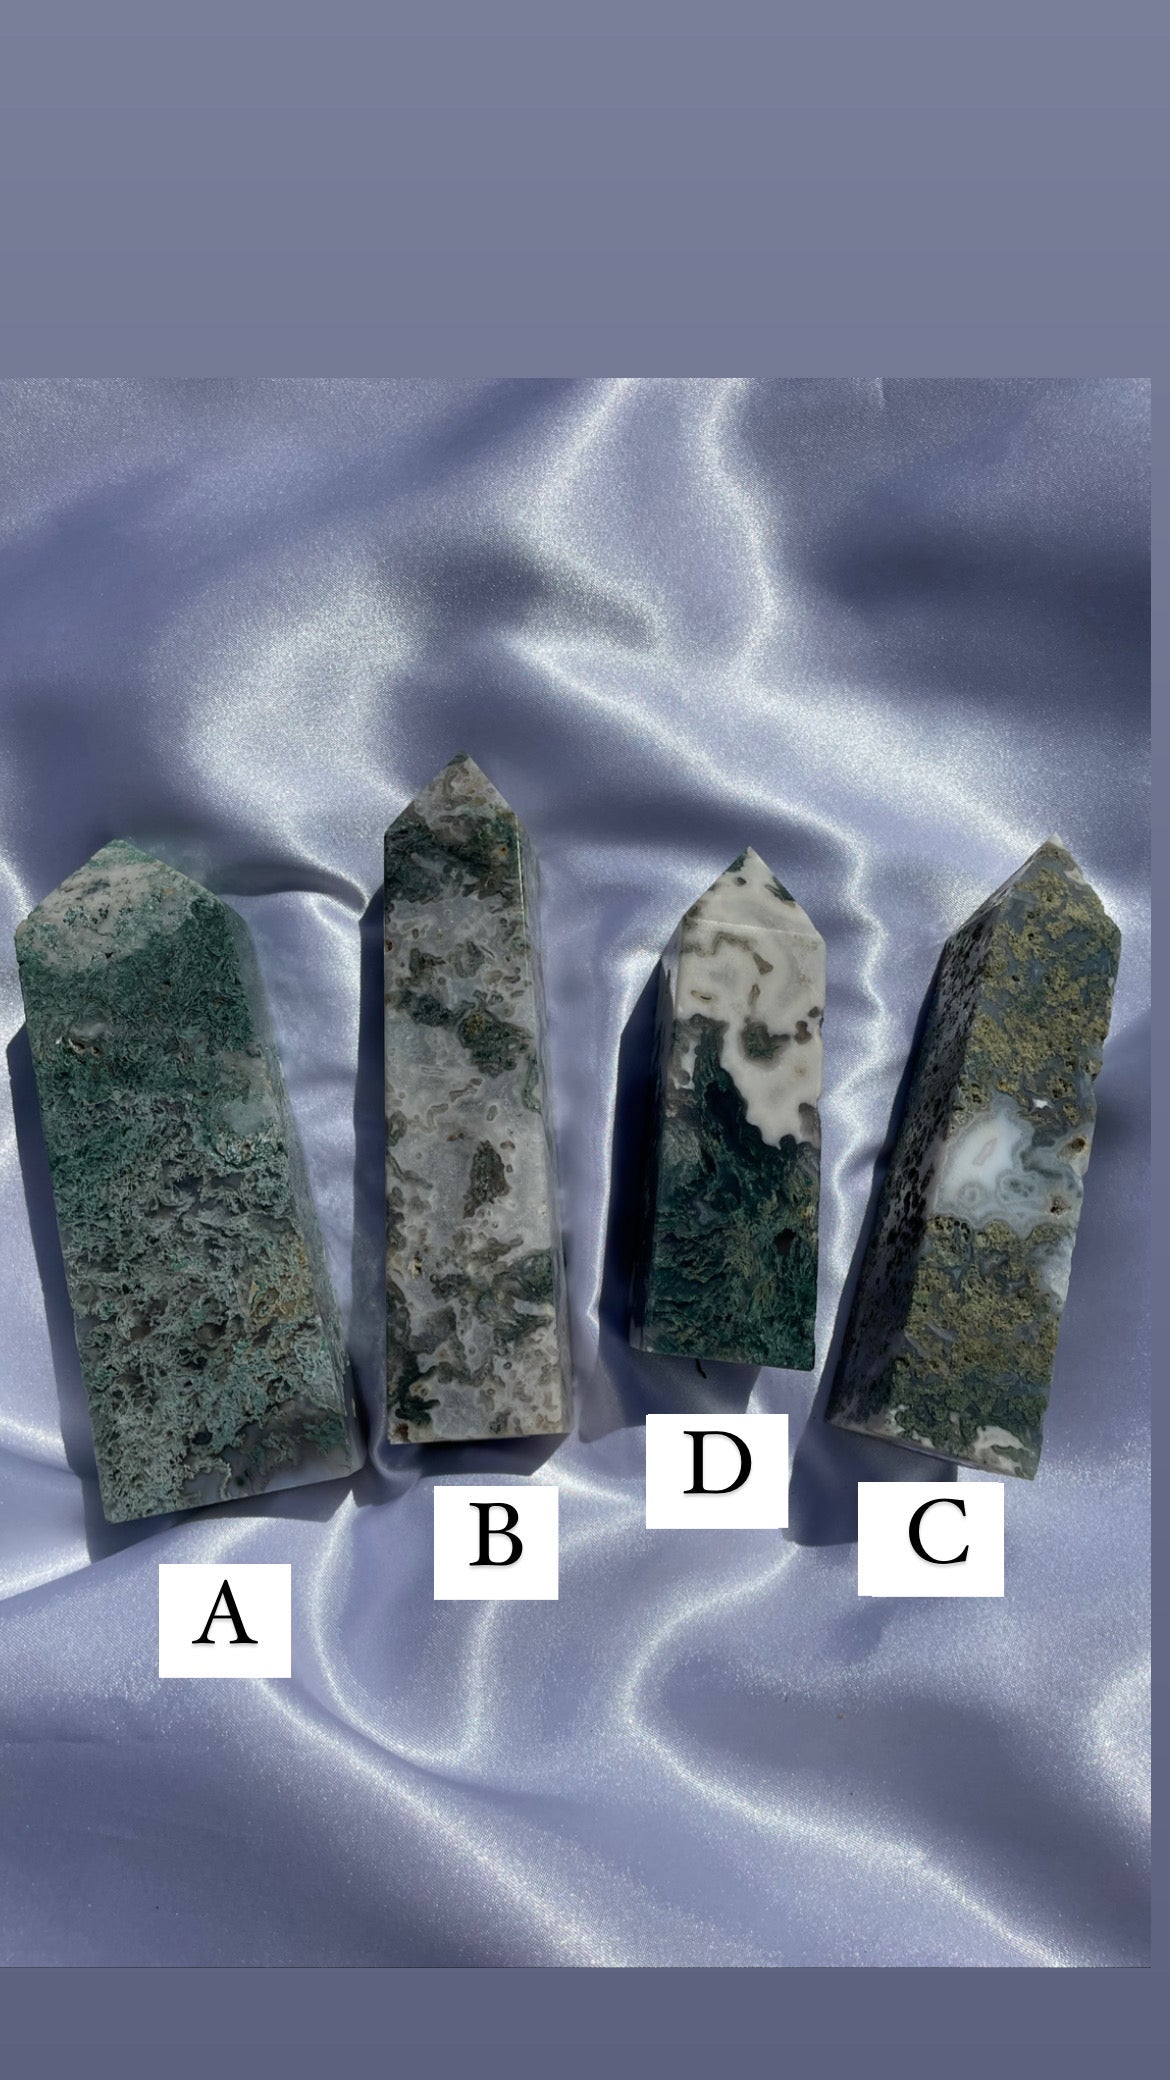 Moss agate towers